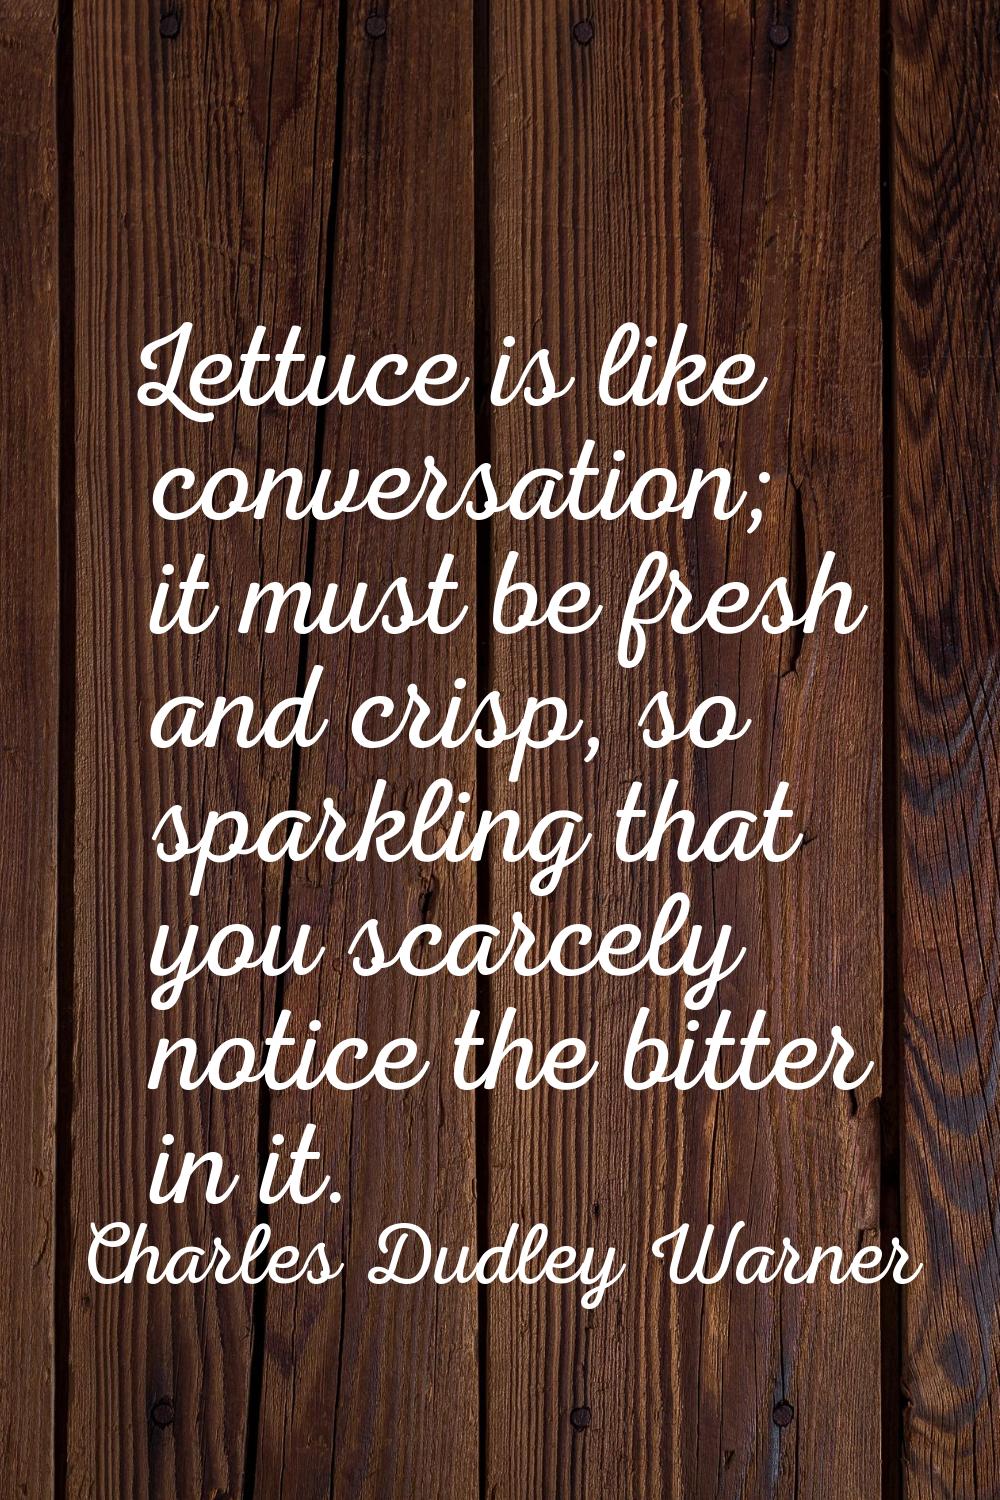 Lettuce is like conversation; it must be fresh and crisp, so sparkling that you scarcely notice the